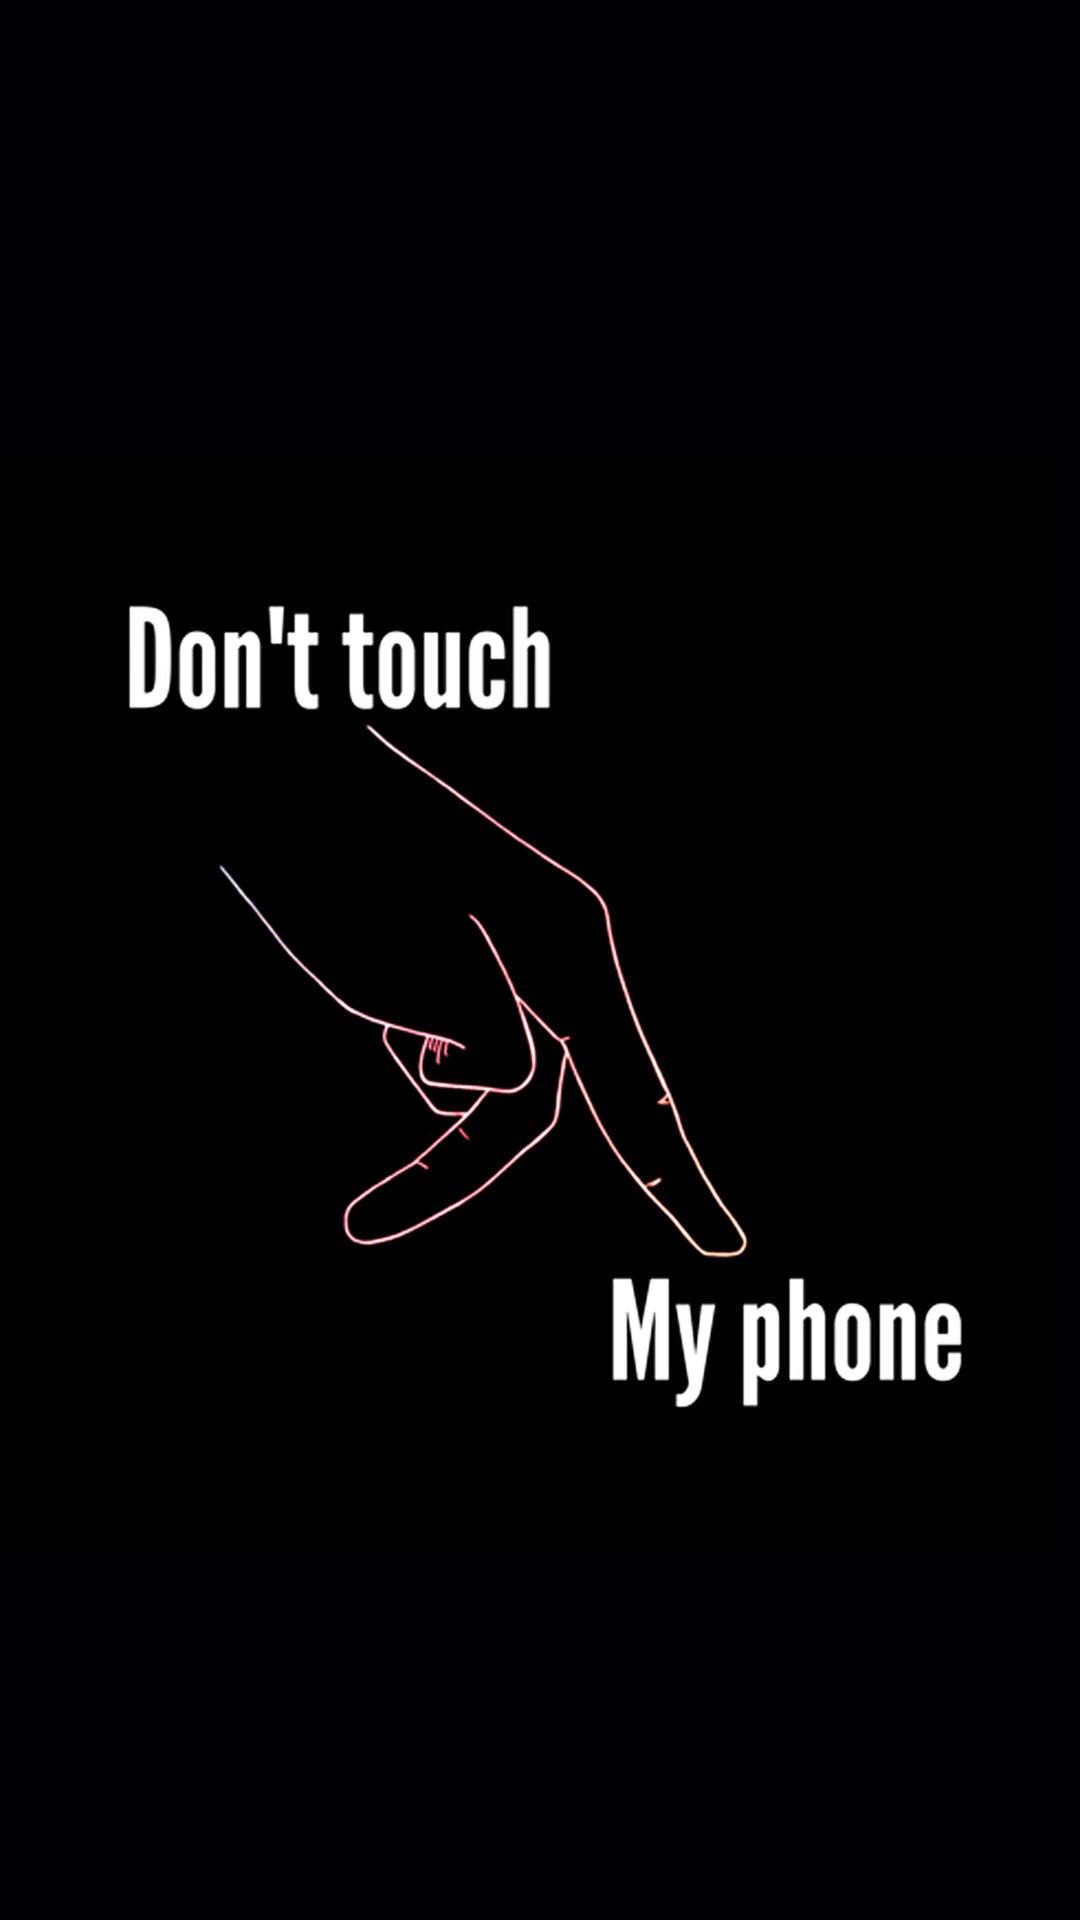 A poster that says don't touch my phone - Don't touch my phone